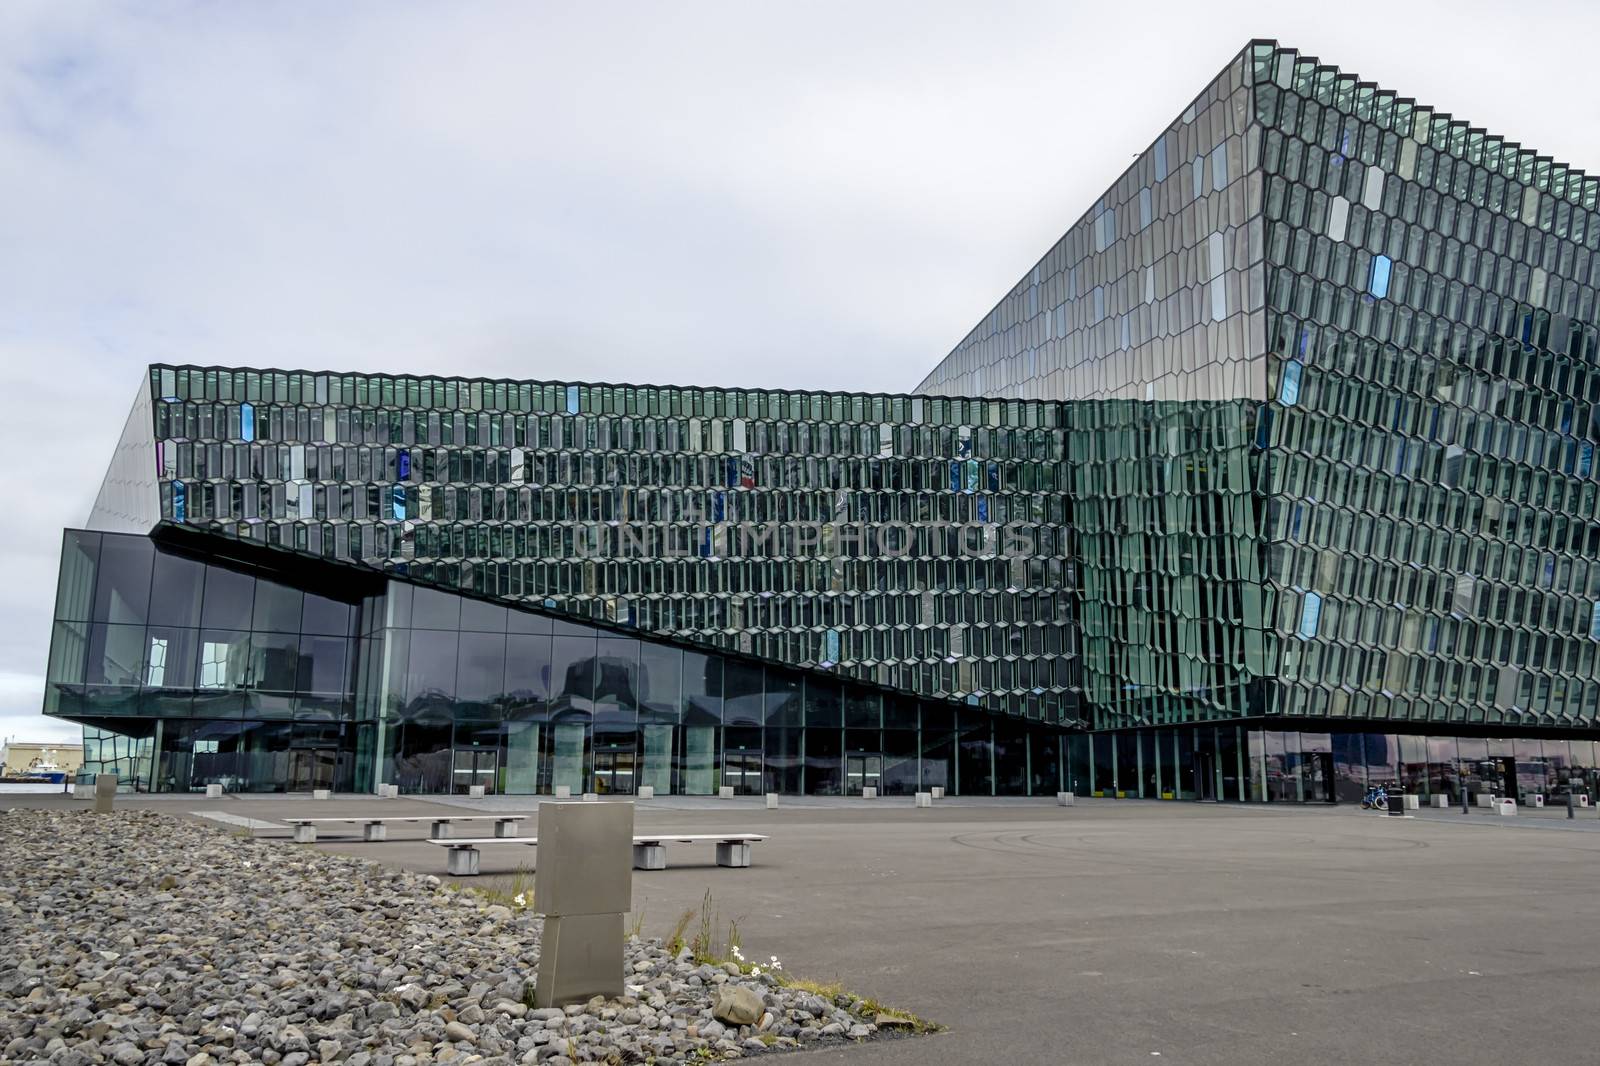 National Music and Conference centrer, Reykjavik, Capital Region by Tetyana